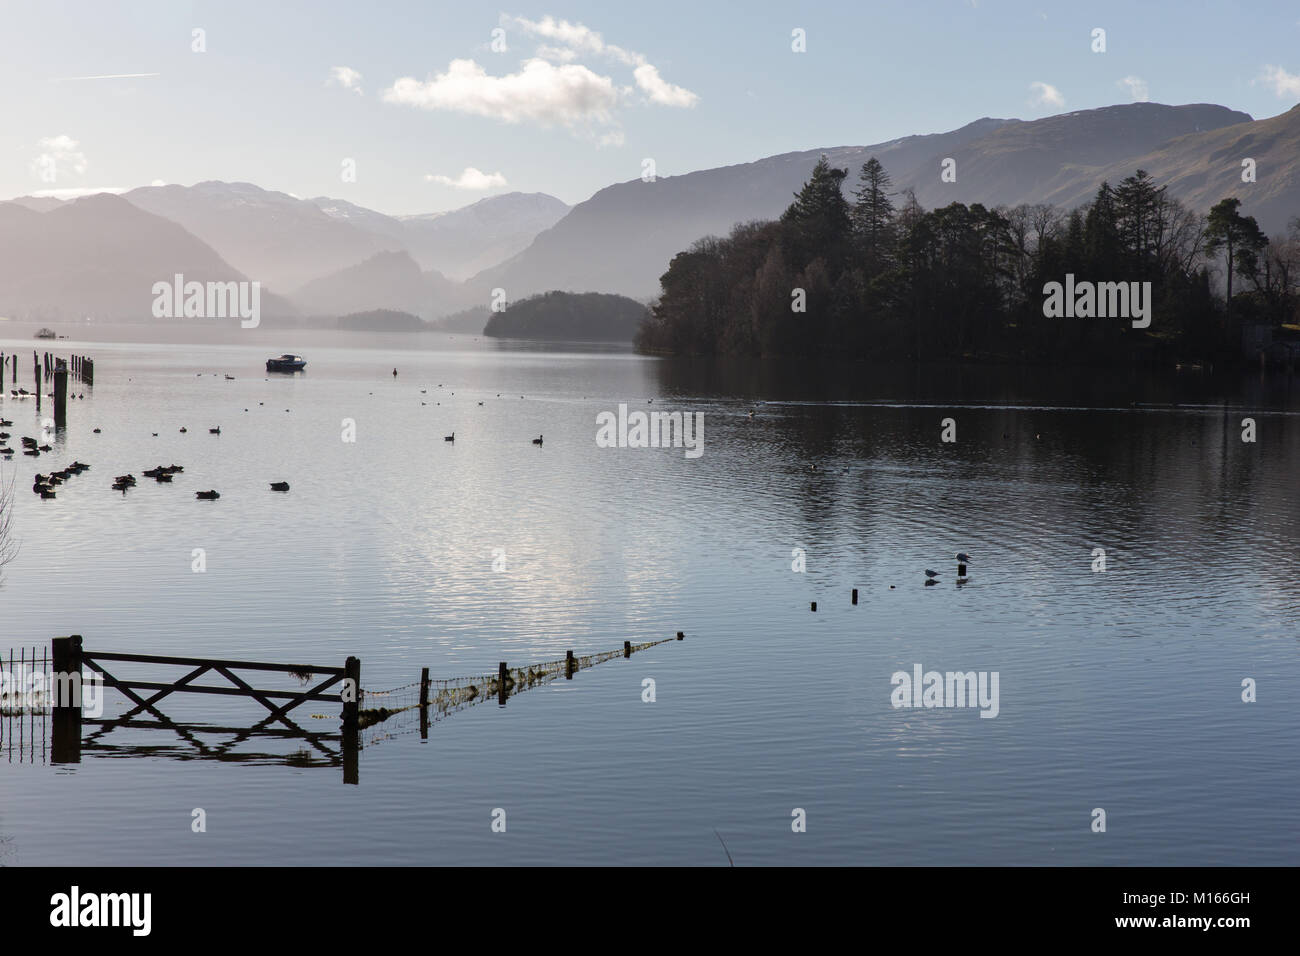 A flooded field on the banks of Derwent Water near Keswick after heavy rains Stock Photo